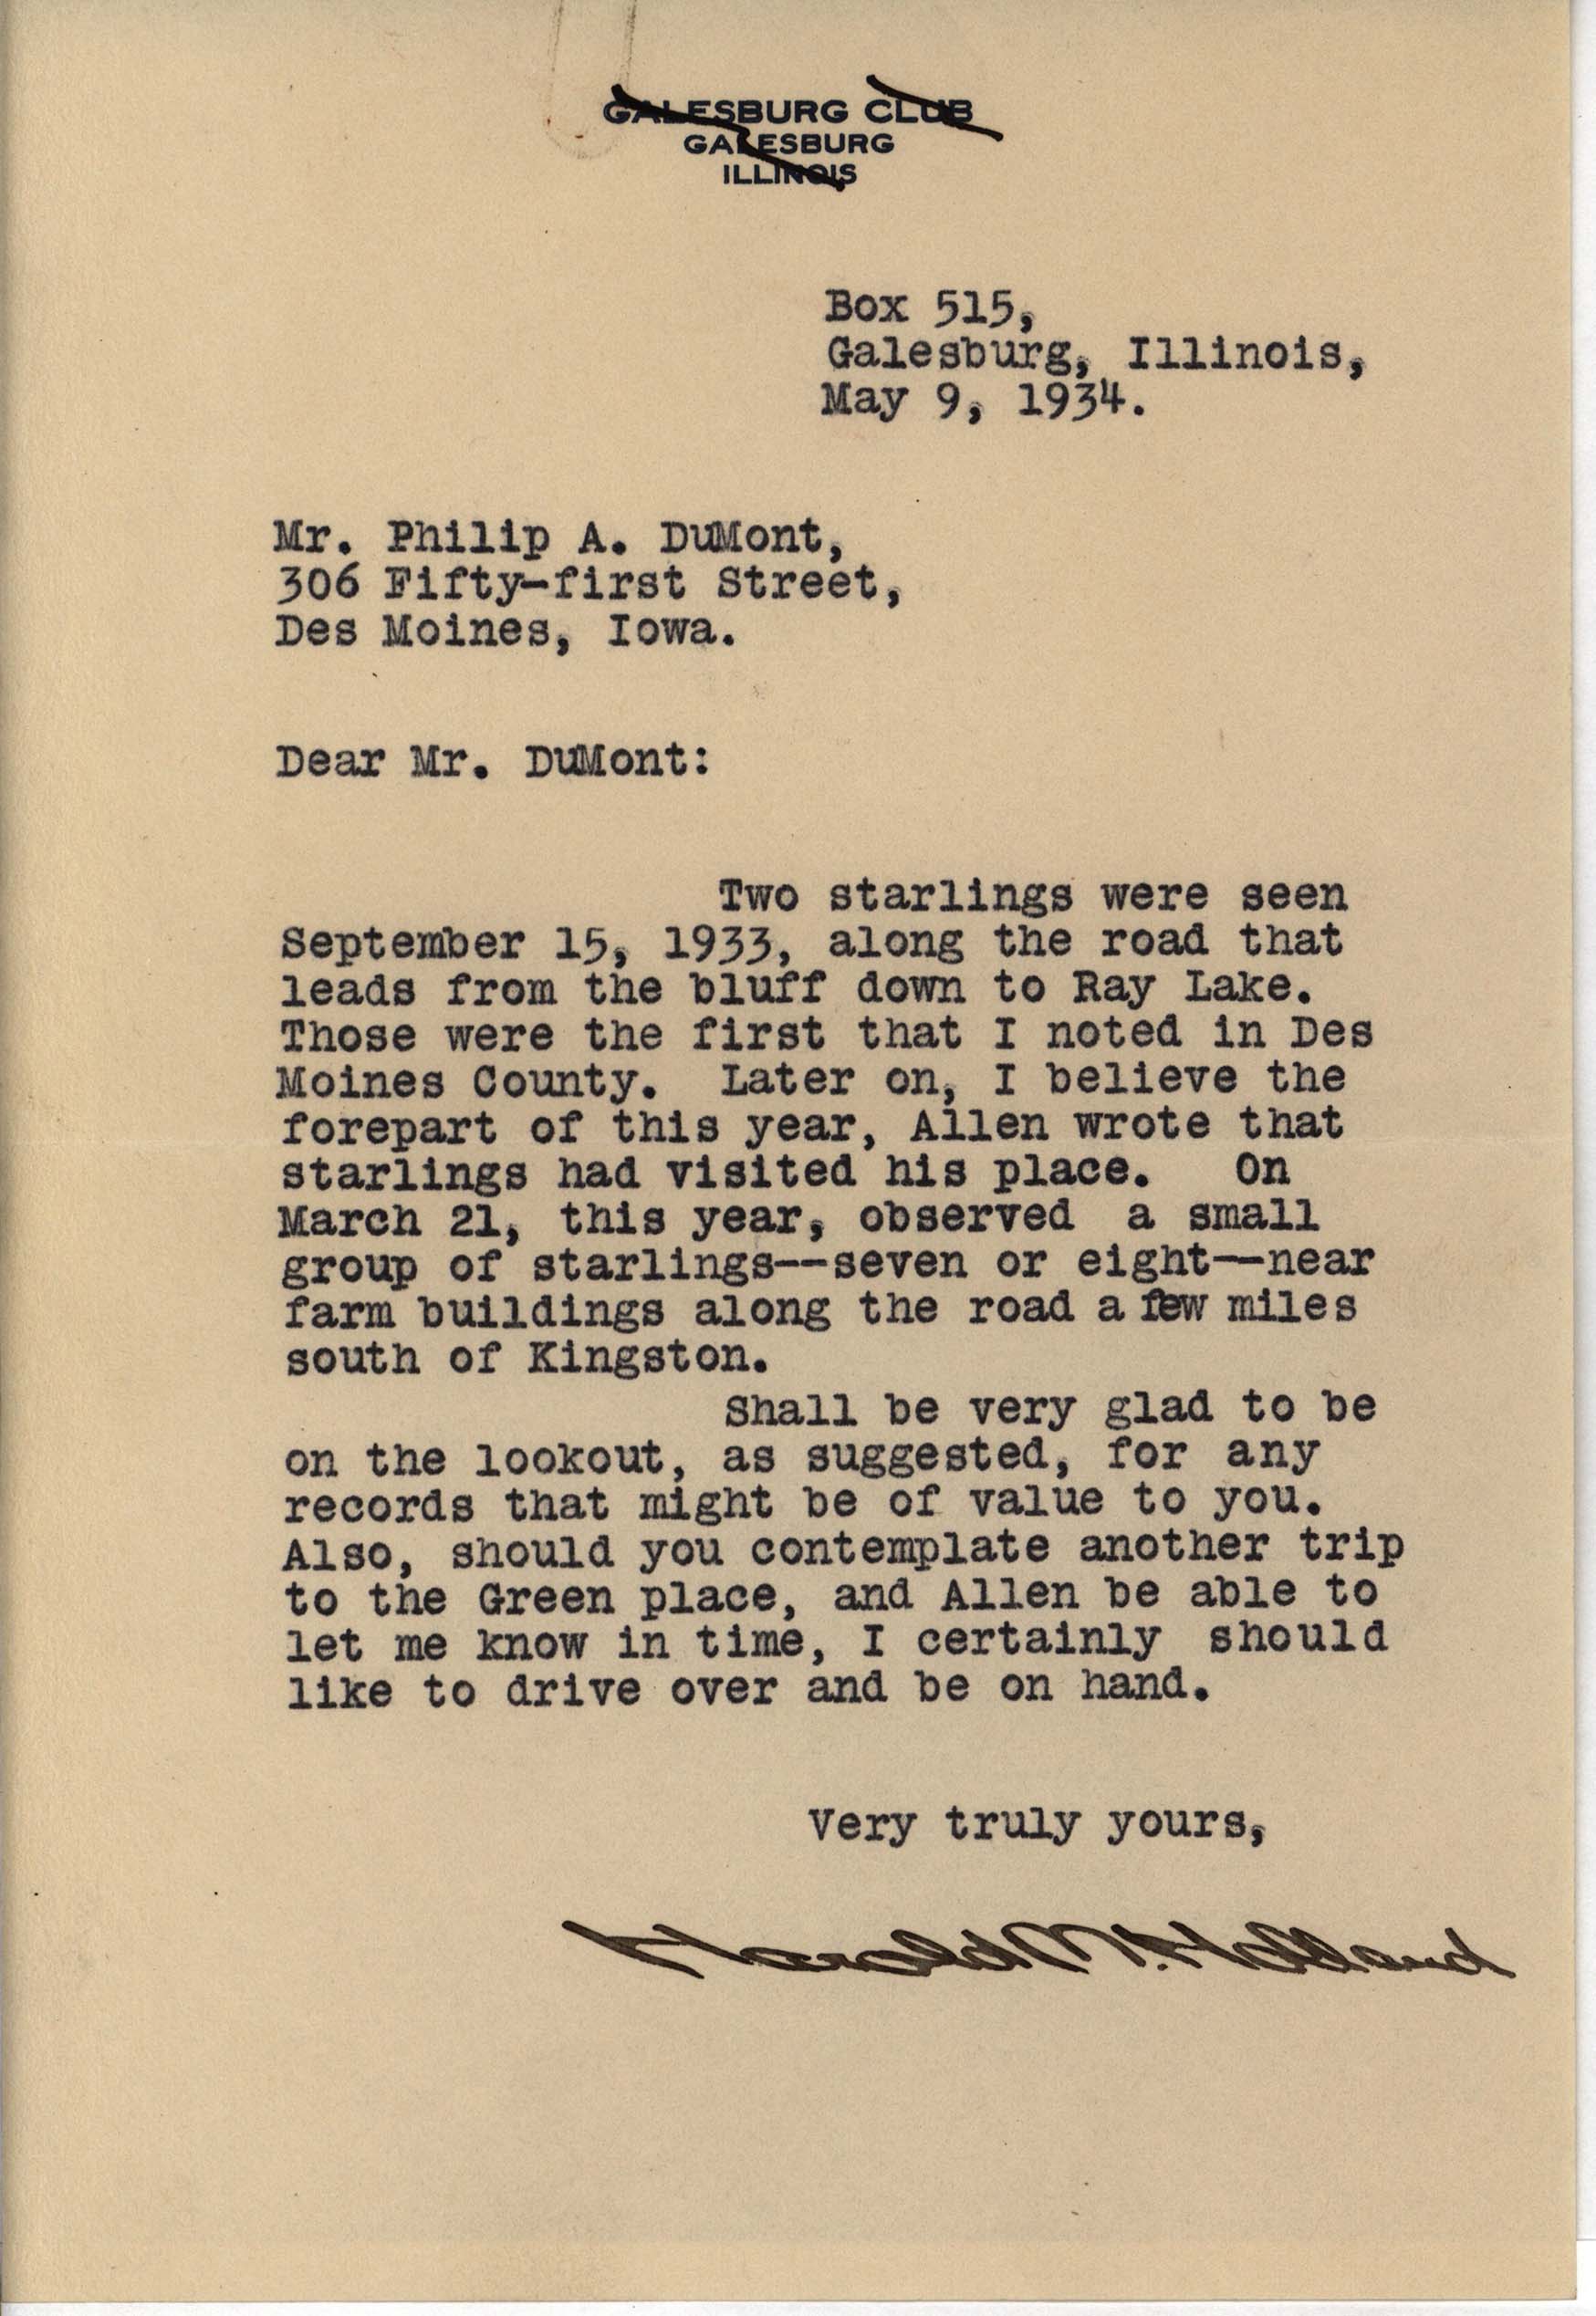 Harold Holland letter to Philip DuMont regarding Starling sightings, May 9, 1934